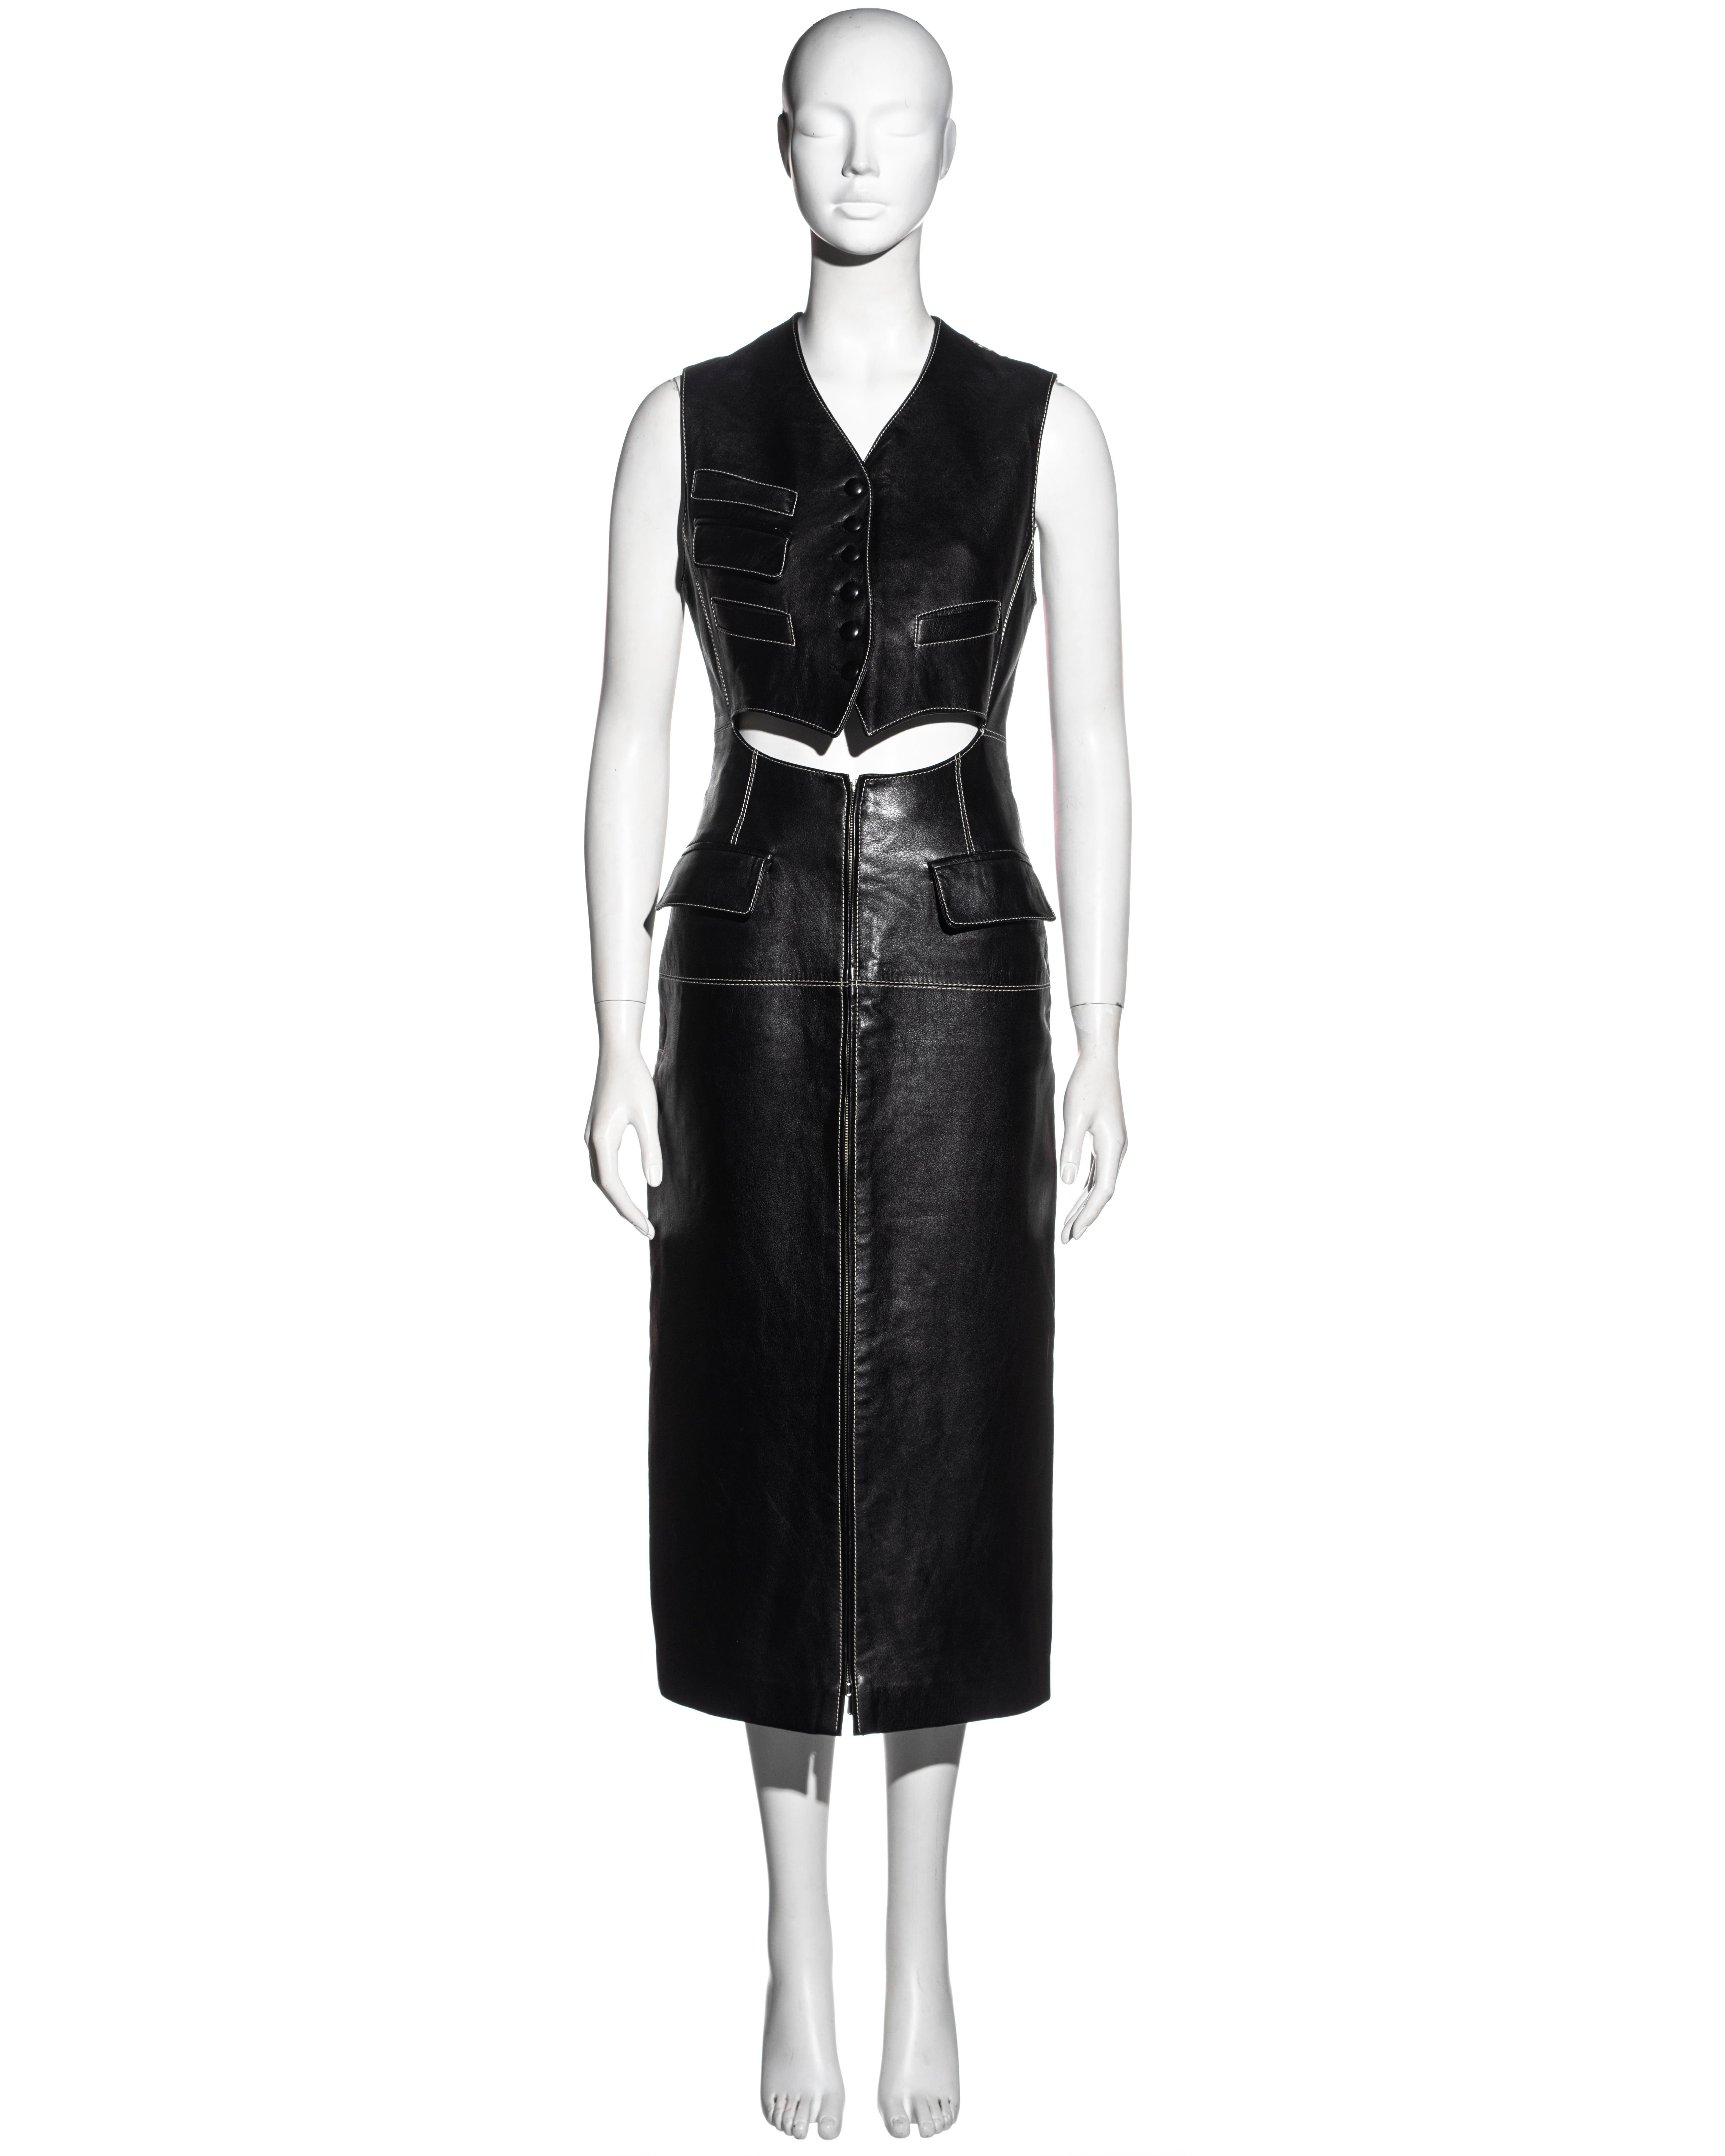 ▪ Jean Paul Gaultier black leather dress
▪ Waistcoat with striped cotton back and buckle fastening
▪ Bare midriff
▪ Leather covered buttons 
▪ Cream topstitch throughout 
▪ Attached calf-length pencil skirt with a metal zipper at the centre-front
▪